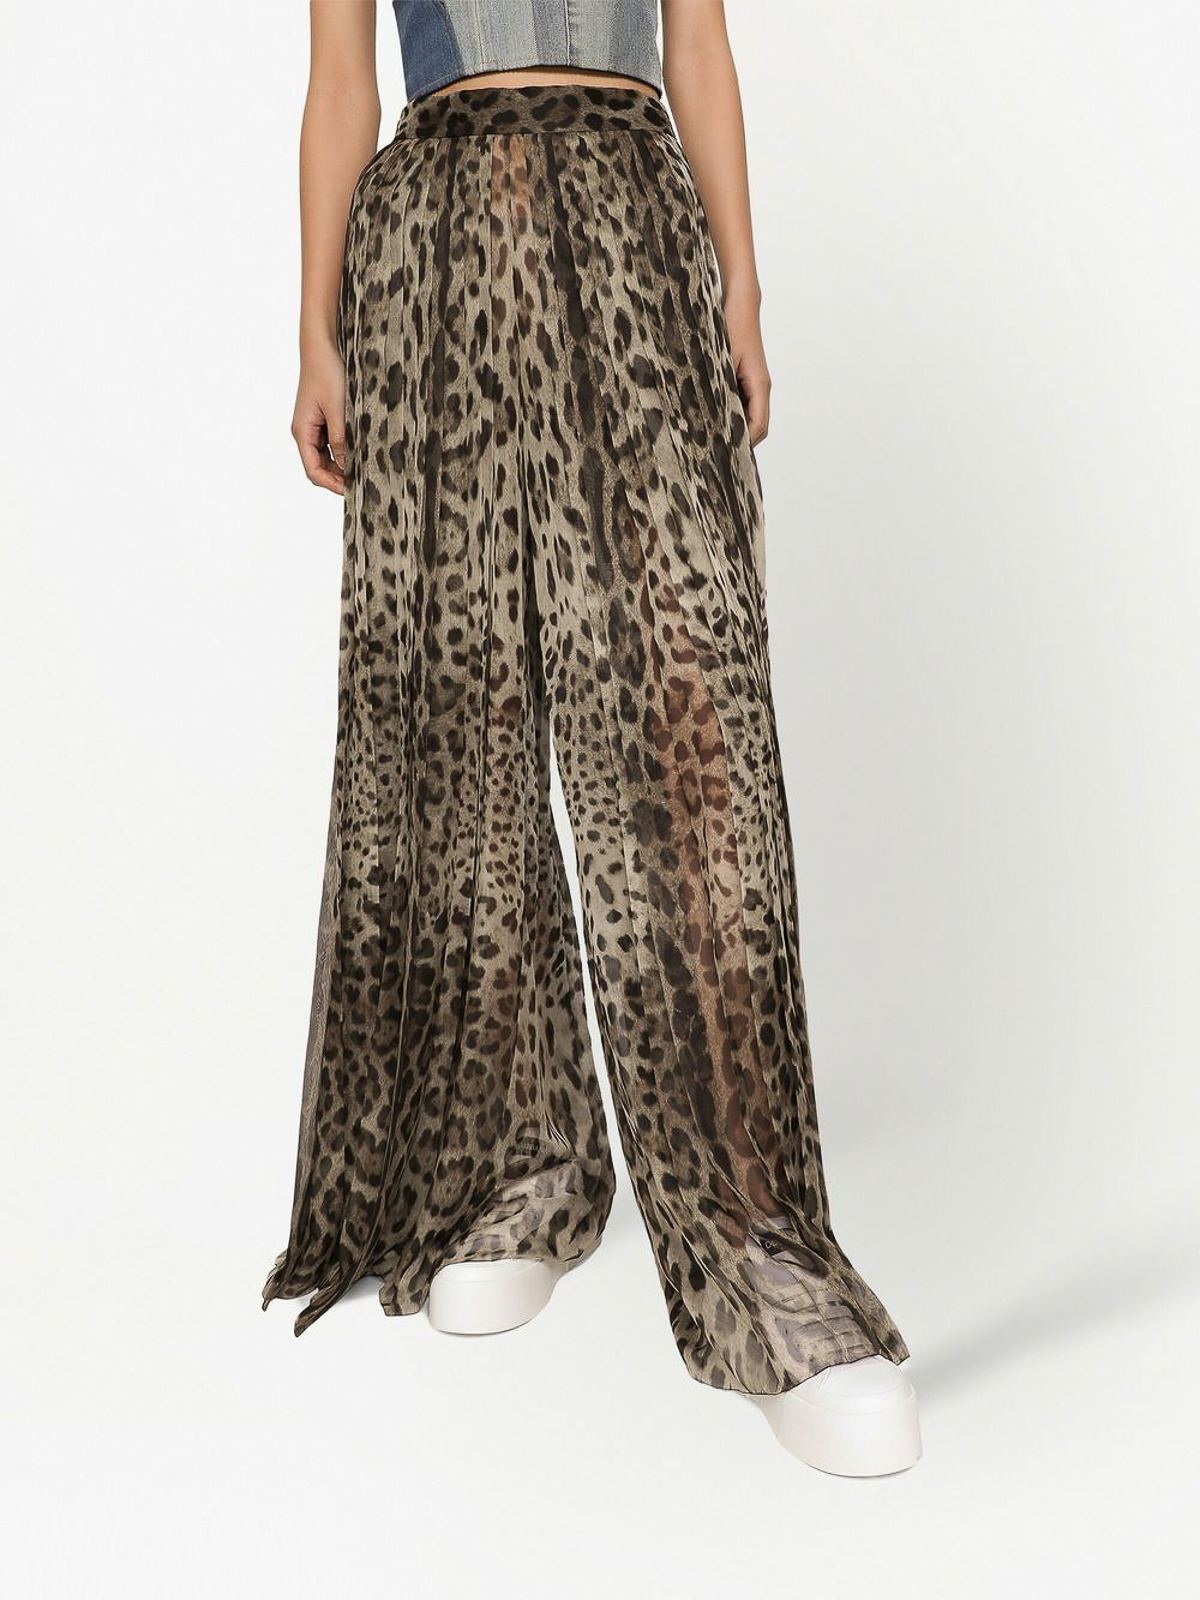 Lindex Trousers Bella Printed - Trousers - Boozt.com